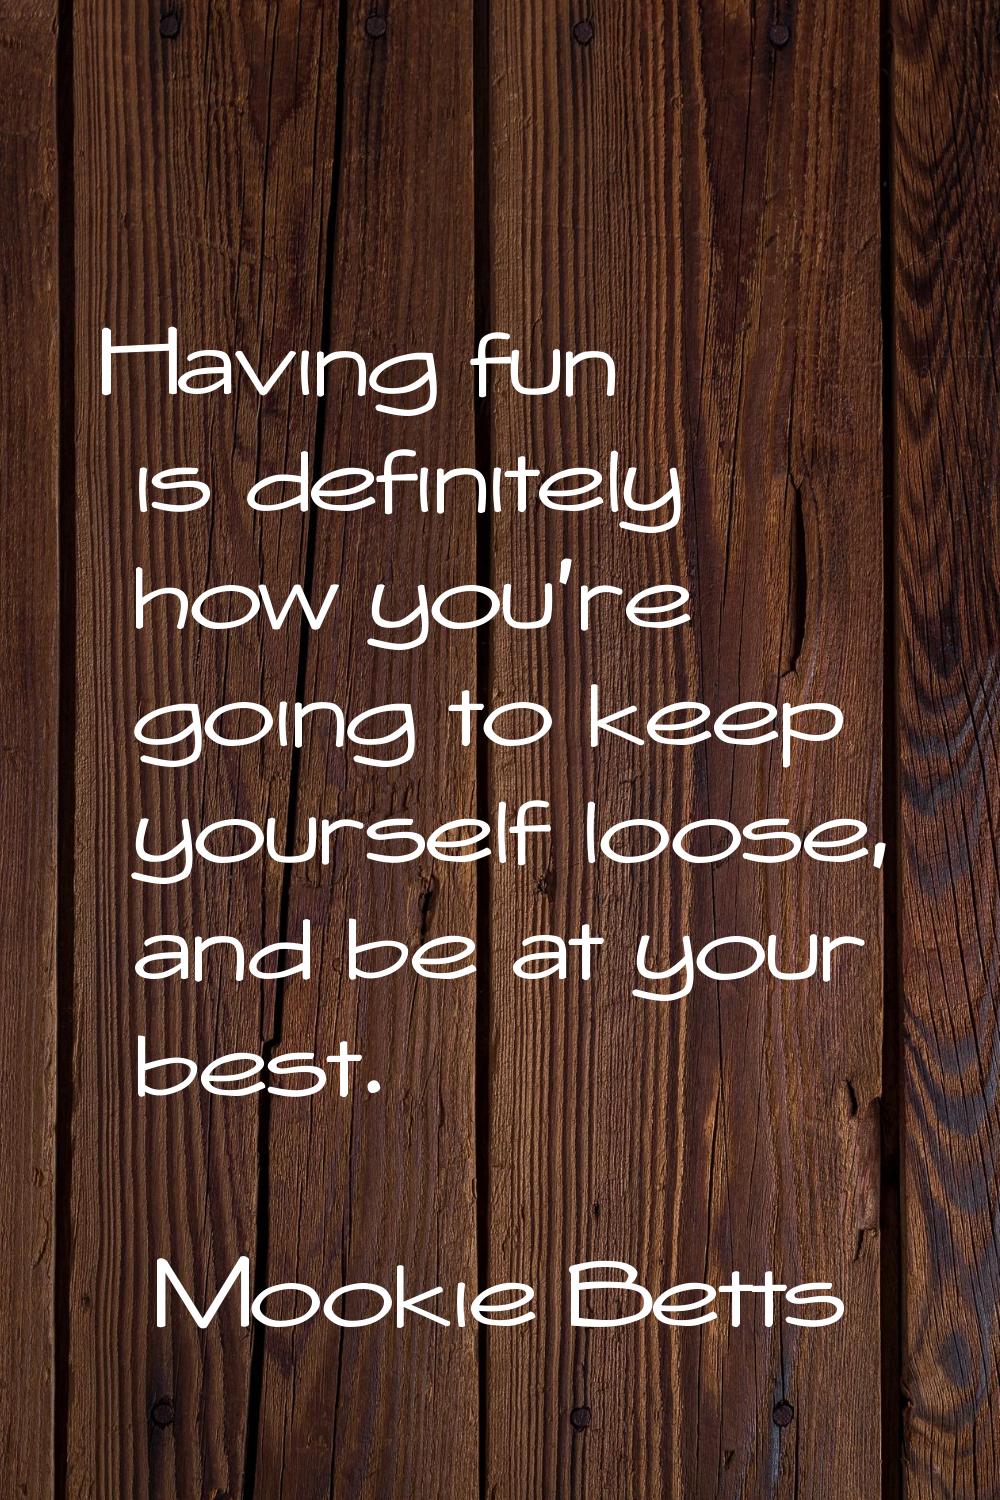 Having fun is definitely how you're going to keep yourself loose, and be at your best.